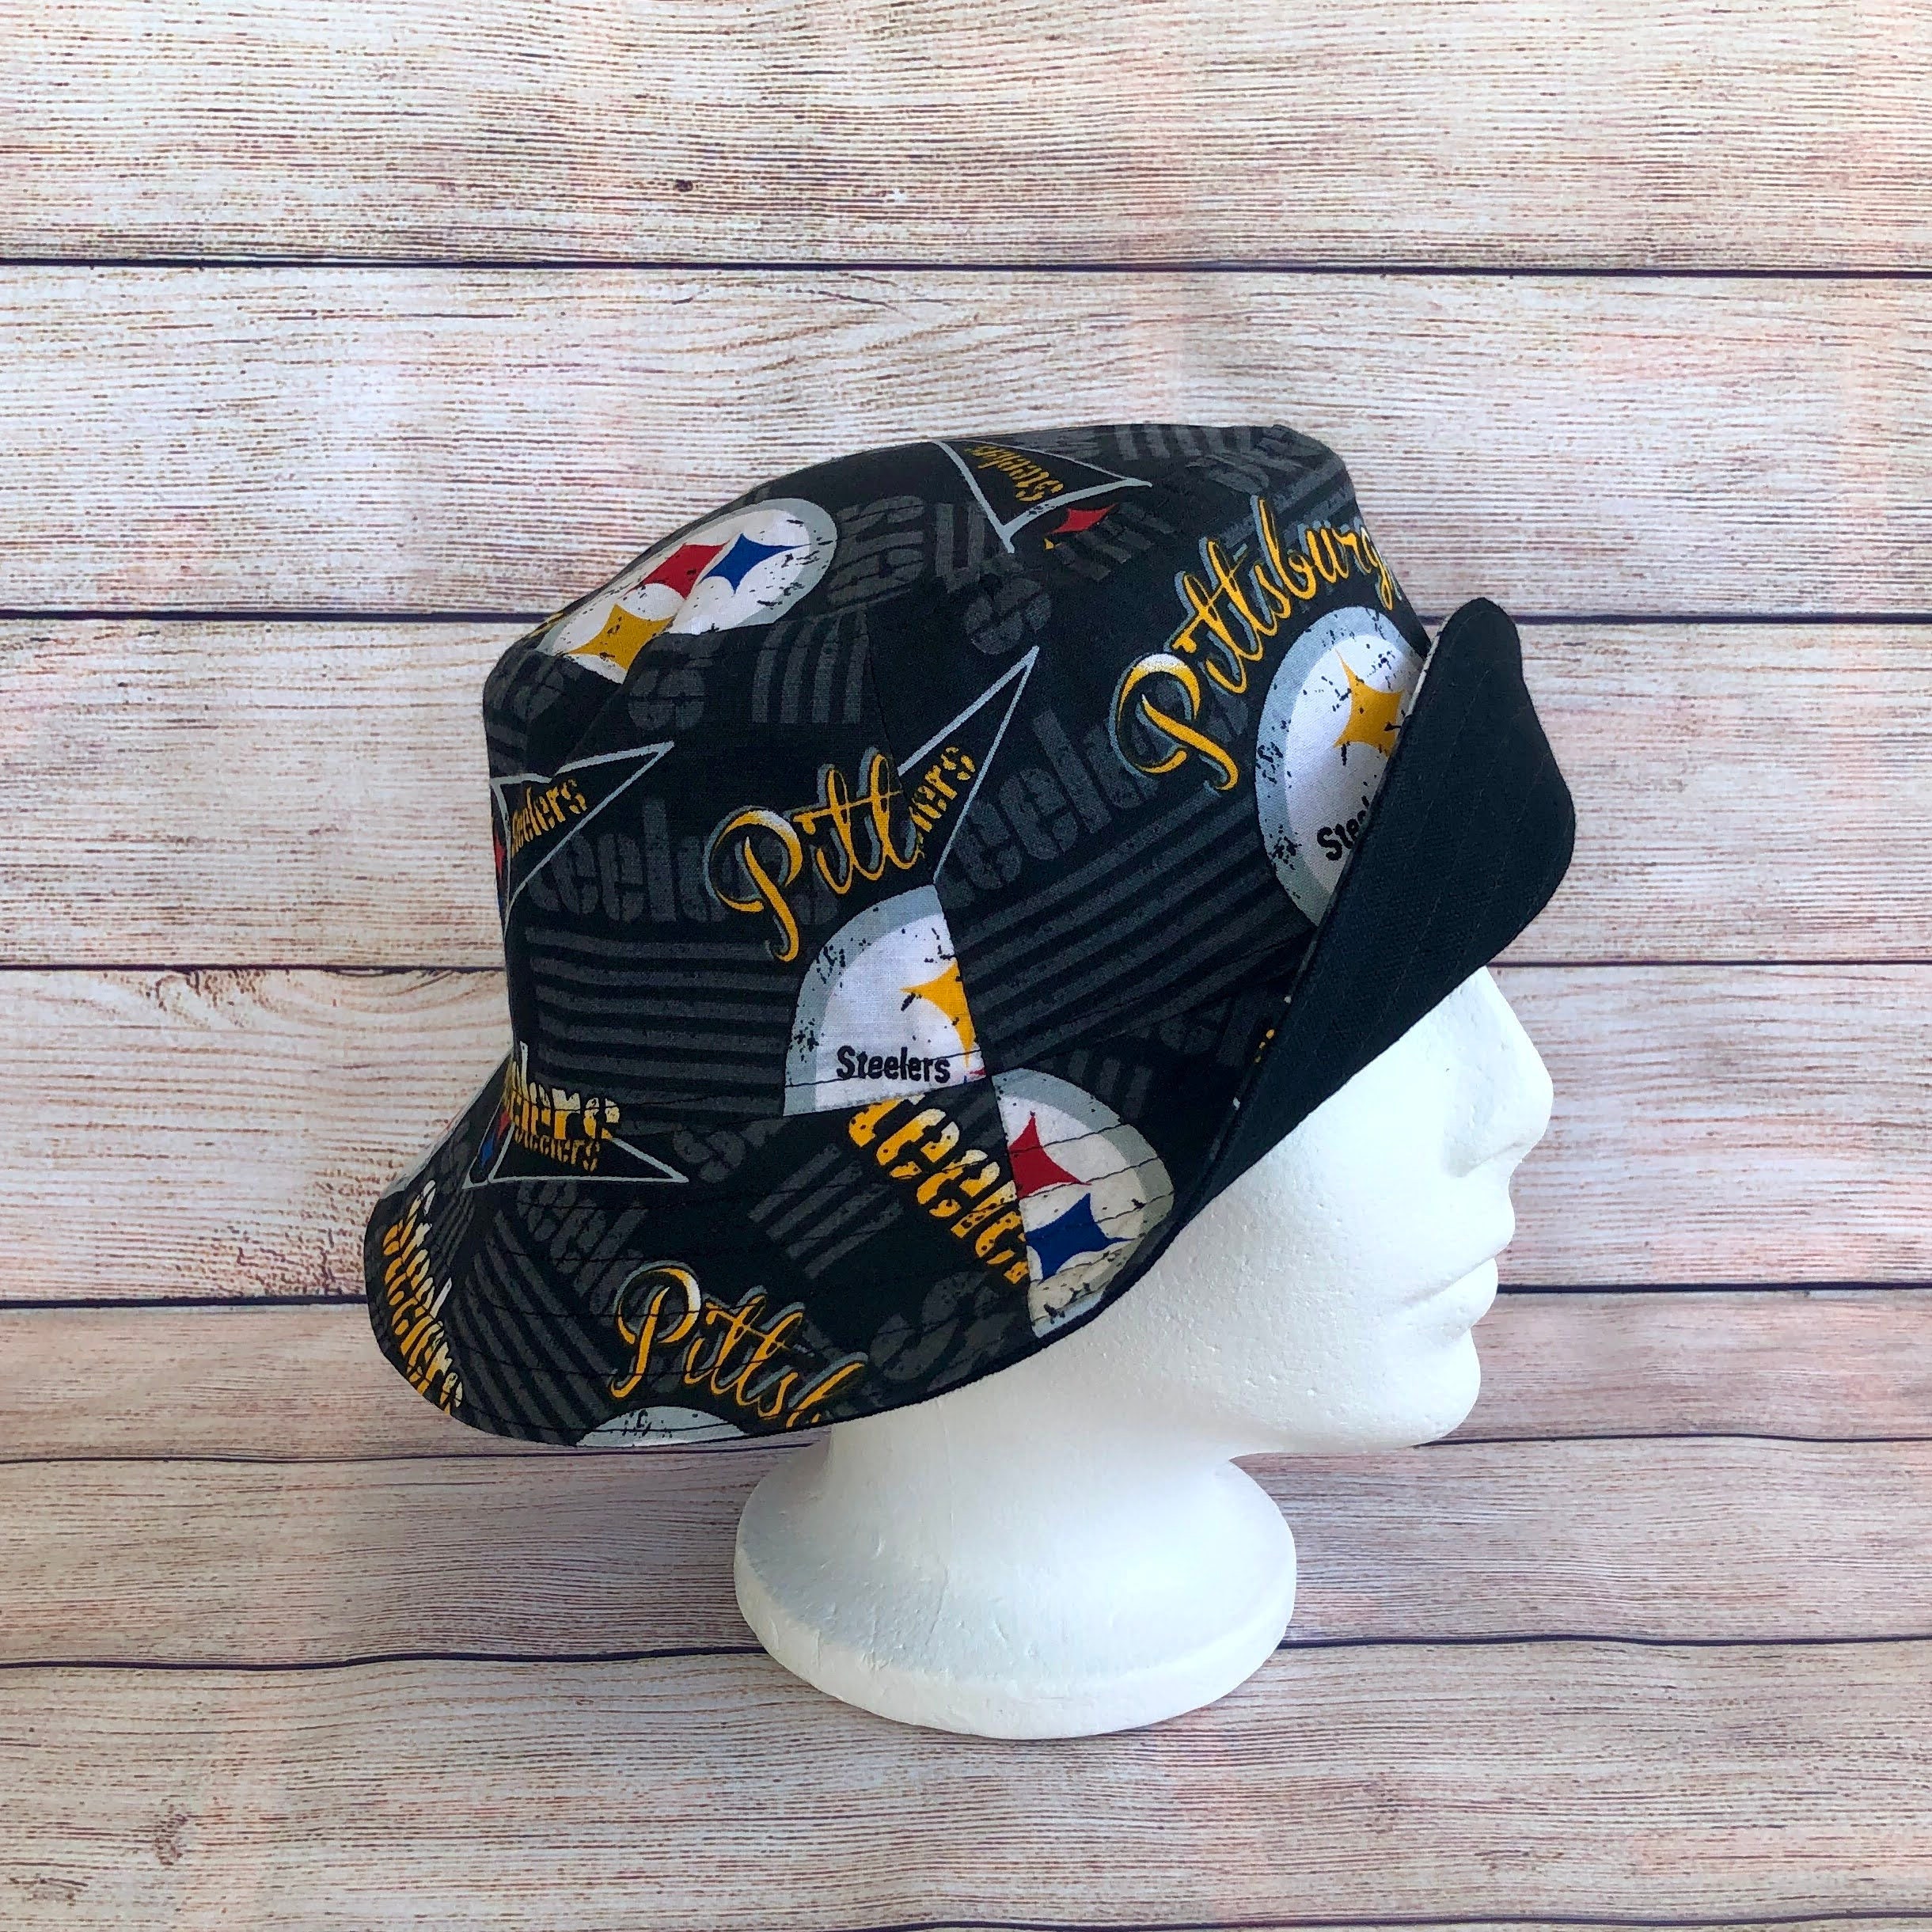 adult Bucket Hat - Pittsburgh Football Sports Team Hat, Football Fan Gear, Football Fan Gift, Gift for Him, Unisex, One Size